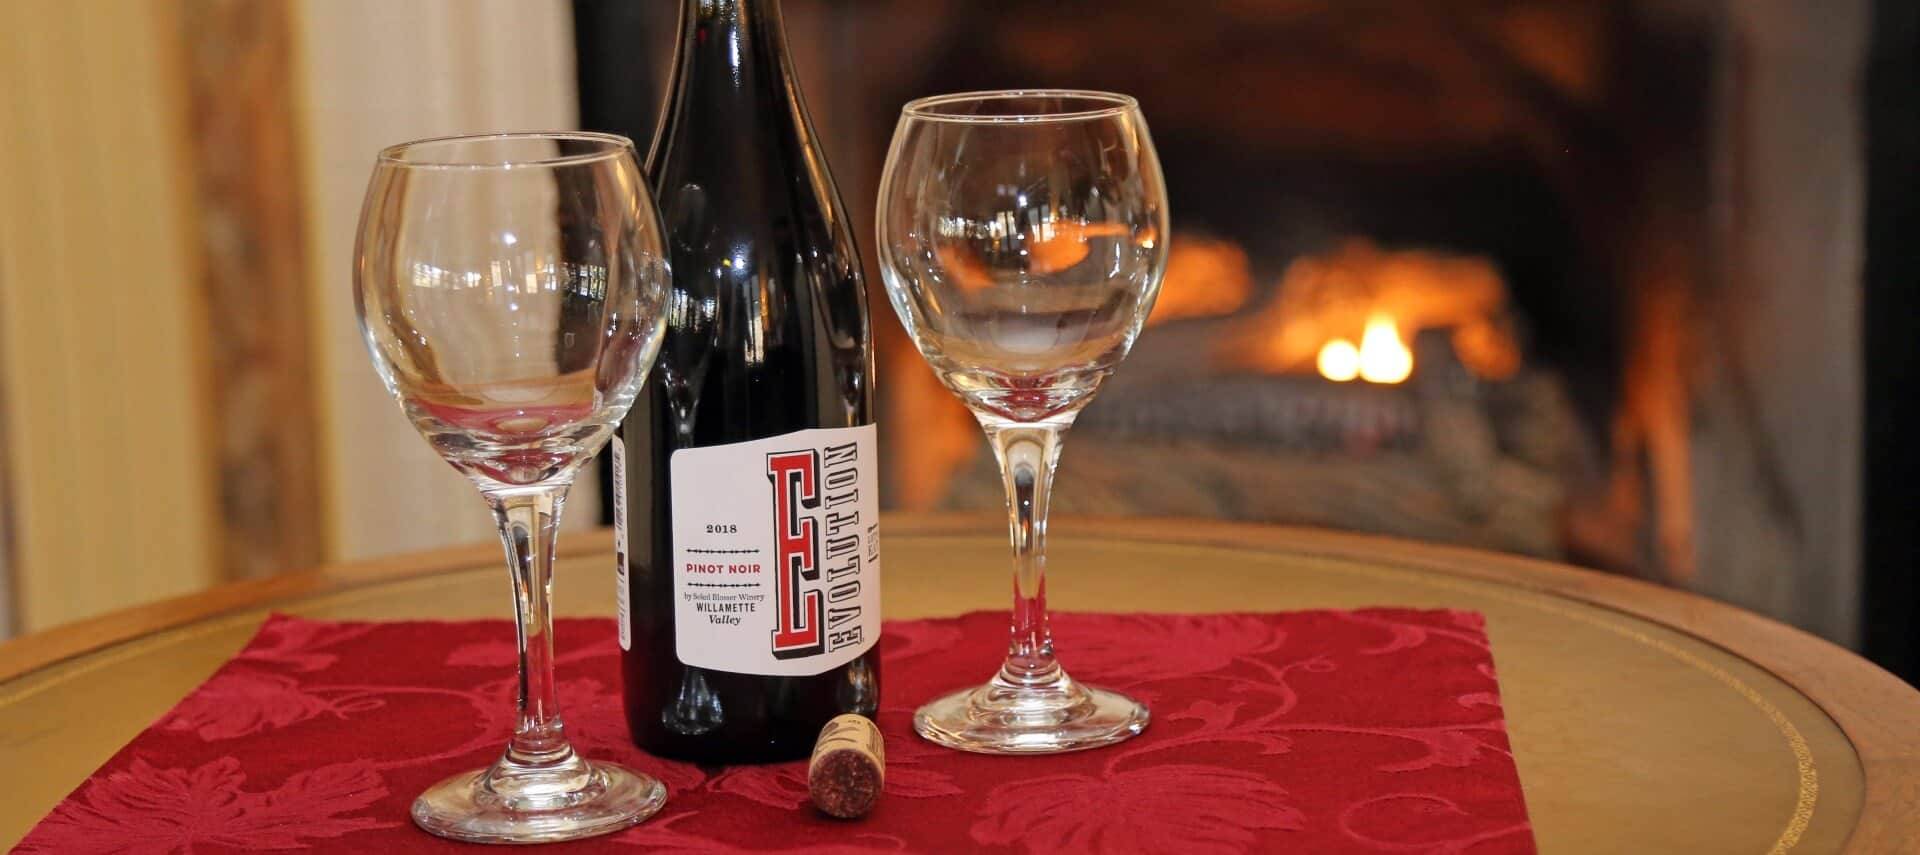 Two glasses and a bottle of wine on a round table by a fireplace